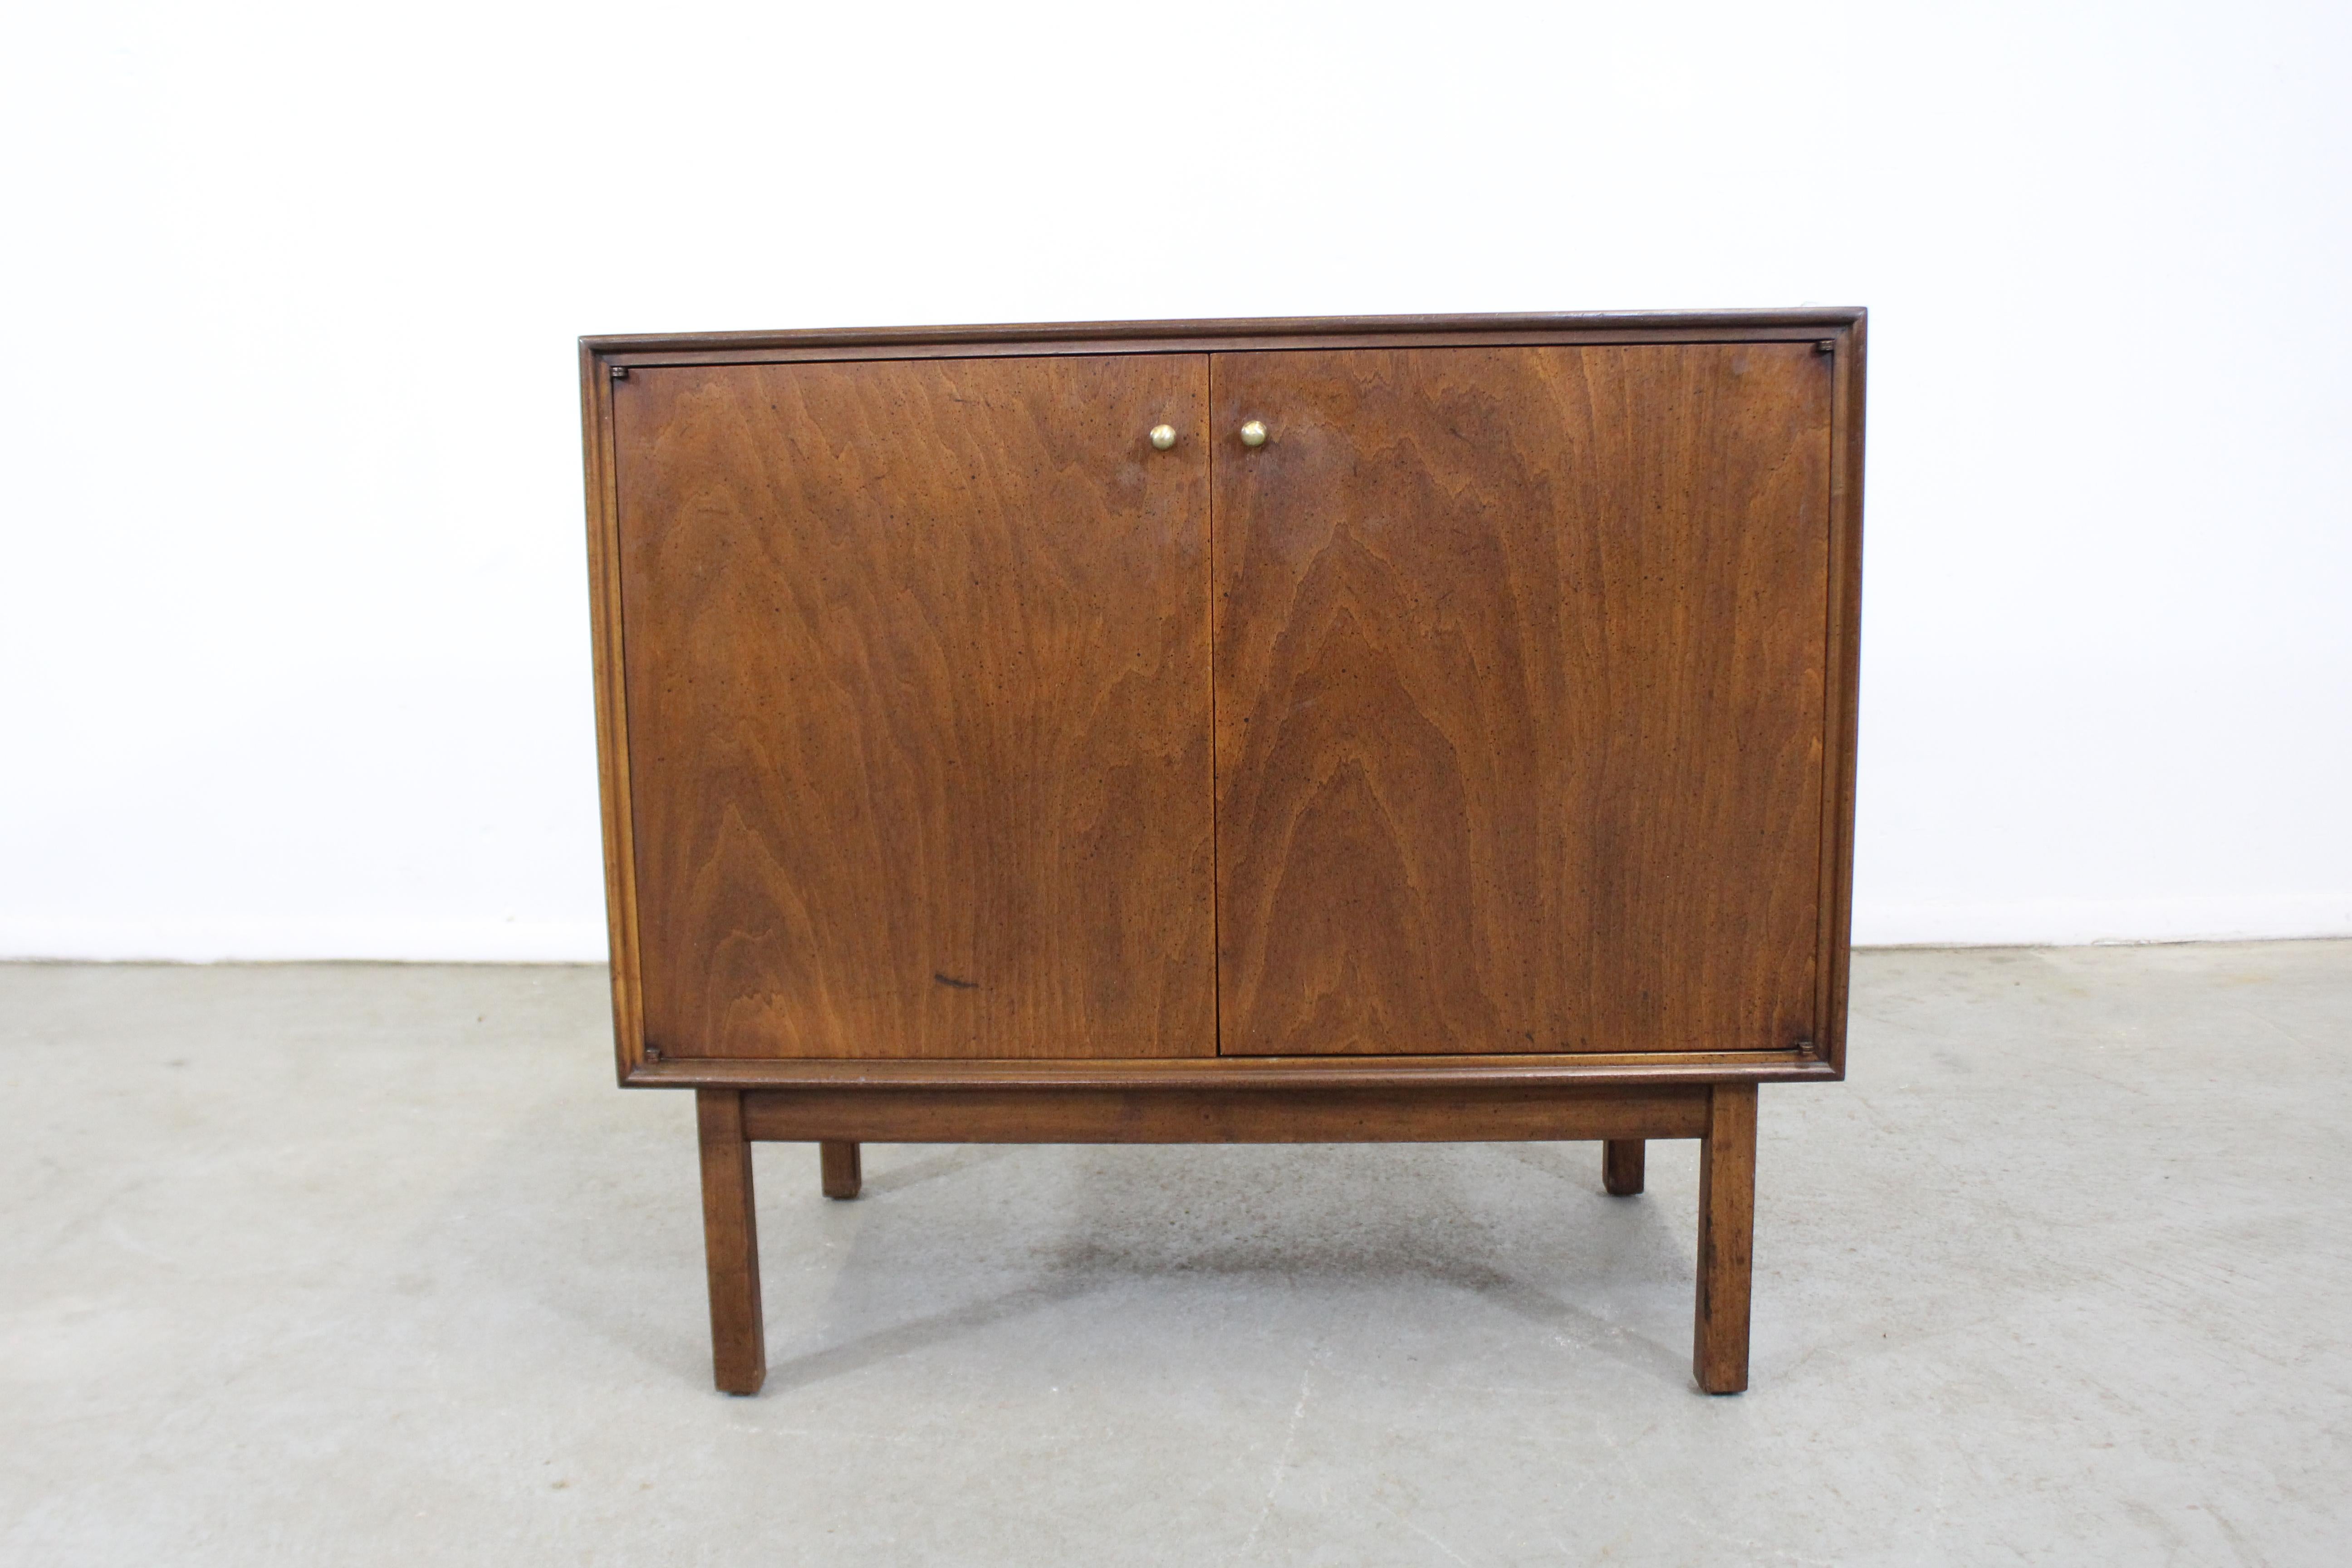 What a find. Offered is a gorgeous Mid-Century Modern mini credenza or server. It is made of walnut with brass pulls, featuring two doors and adjustable inner shelving. It is in very good condition for its age showing slight surface wear and